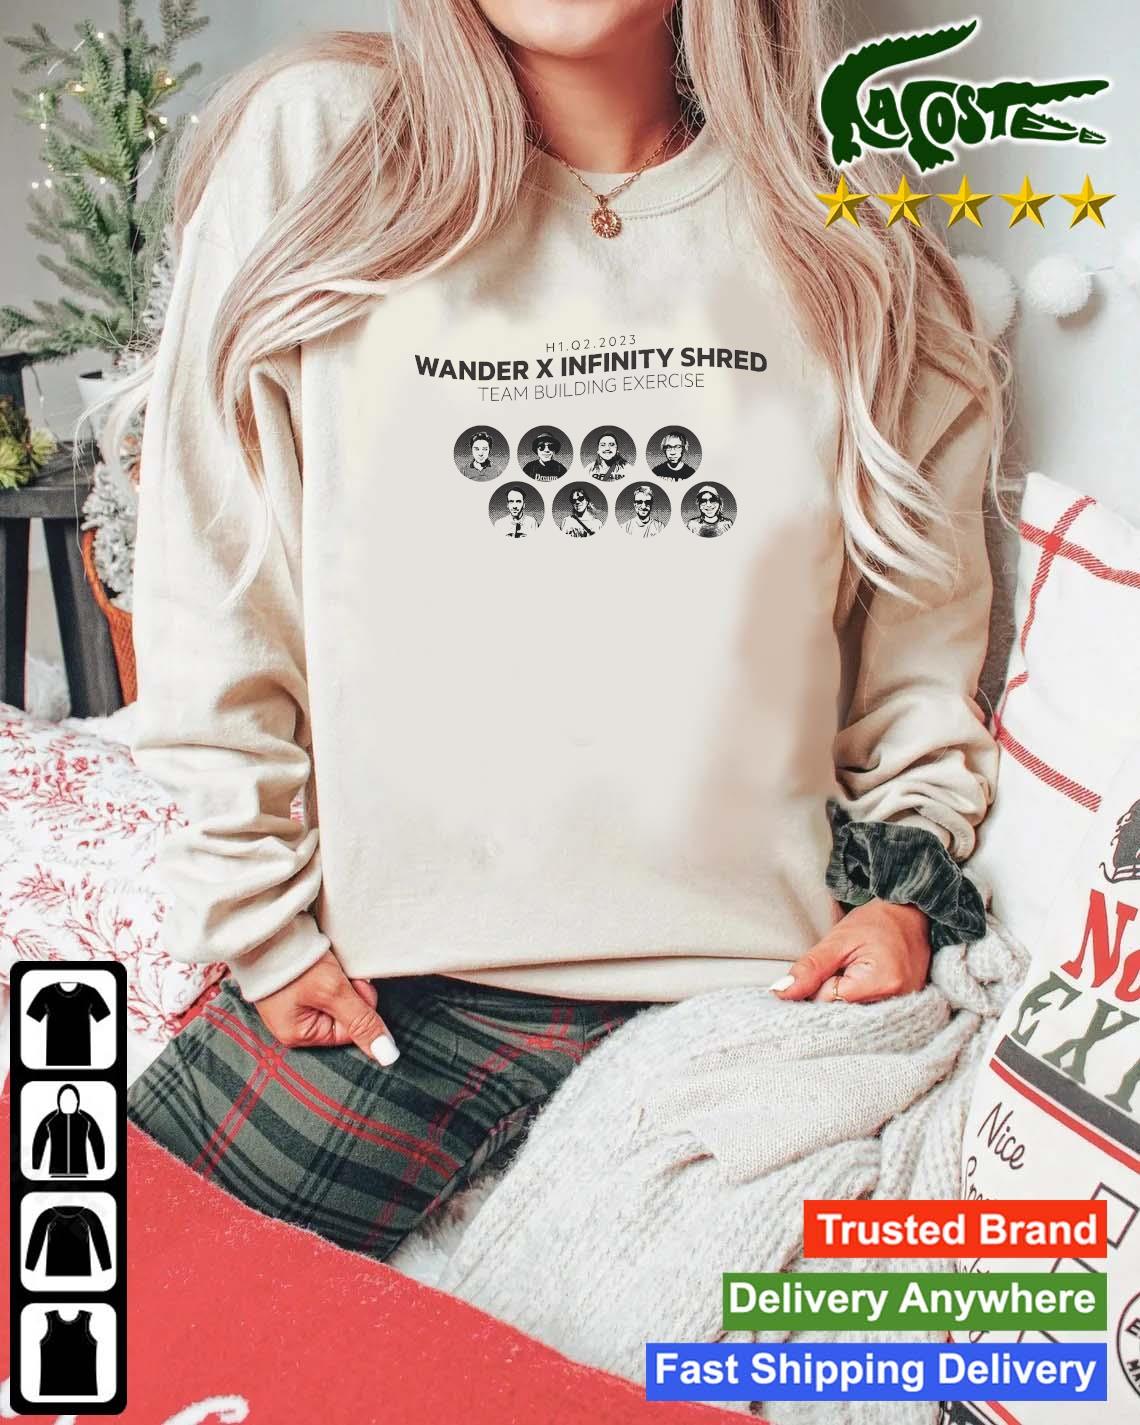 Wander X Infinity Shred Team Building Exercise H1 Q2 2023 Sweats Mockup Sweater